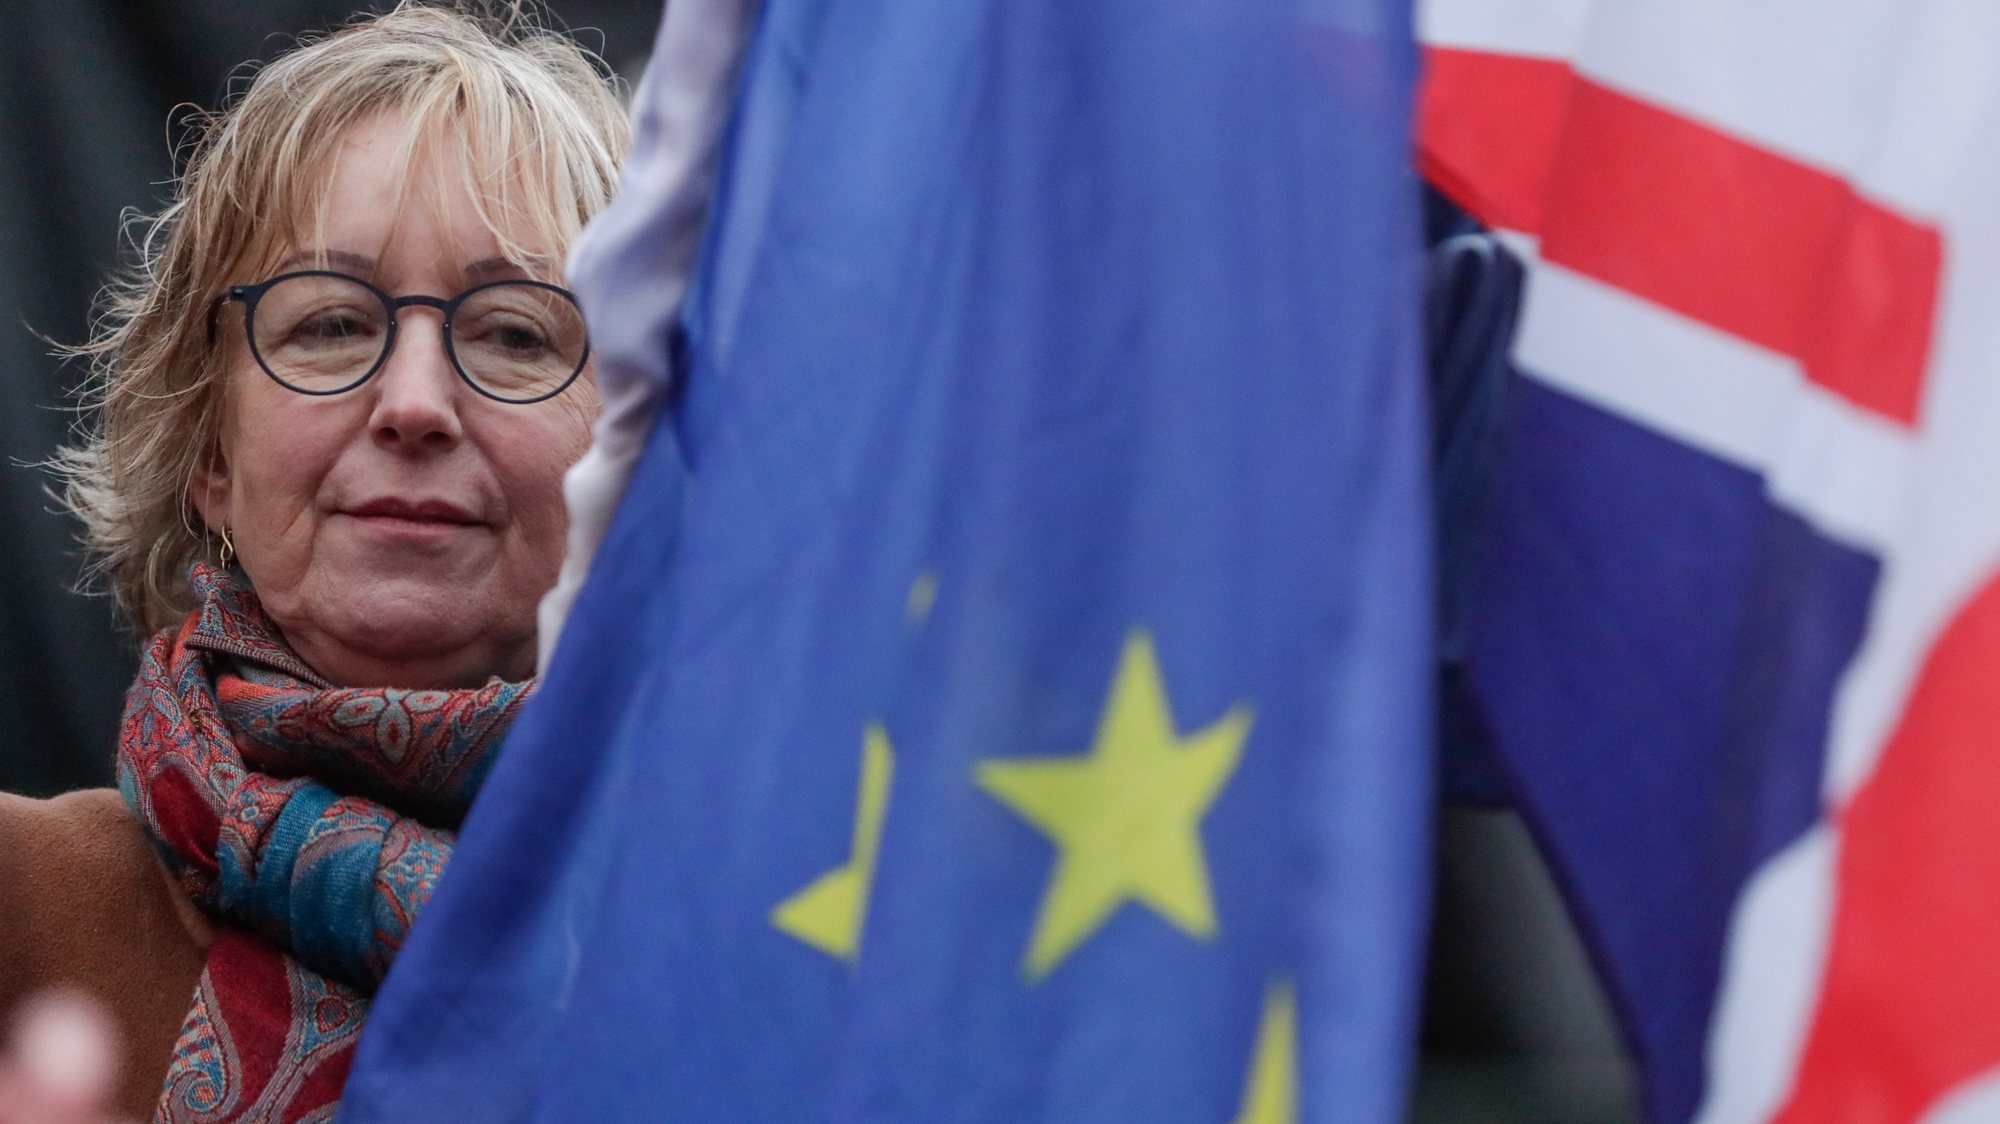 epa08179430 A woman holds a European flag and a Union Jack flag on the Grand Place in Brussels, Belgium, 30 January 2020. The city of Brussels is organizing the &#039;Brussels Calling&#039; event to underline its long friendship with the British. The UK will leave the EU on 31 January 2020.  EPA/STEPHANIE LECOCQ